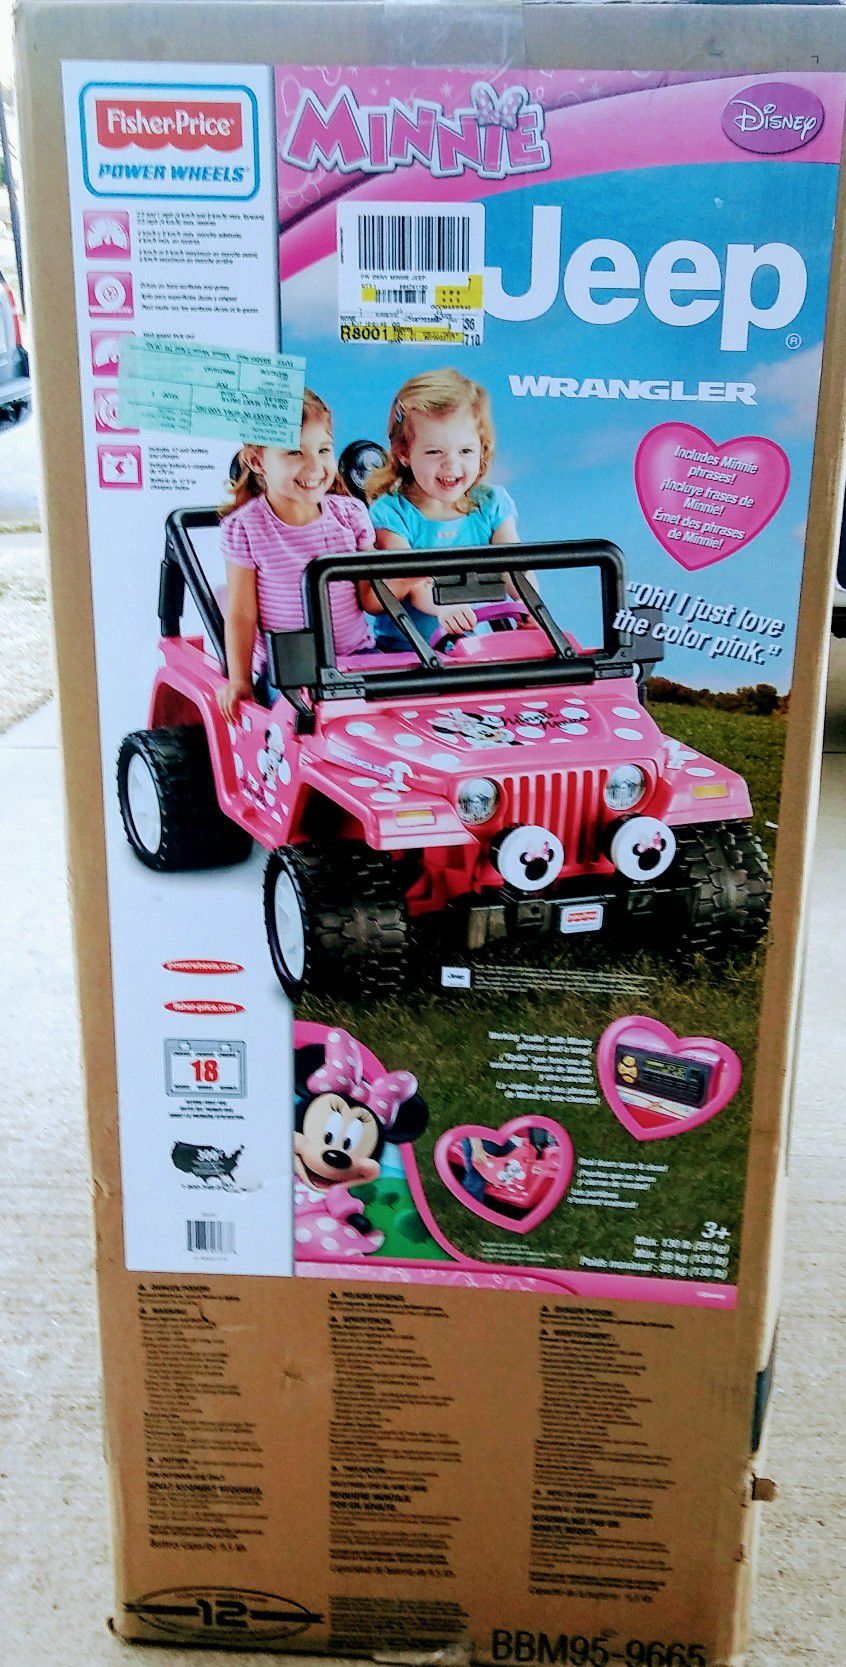 Minnie Mouse 12V Jeep Wrangler Ride-On for Sale in NC, US - OfferUp